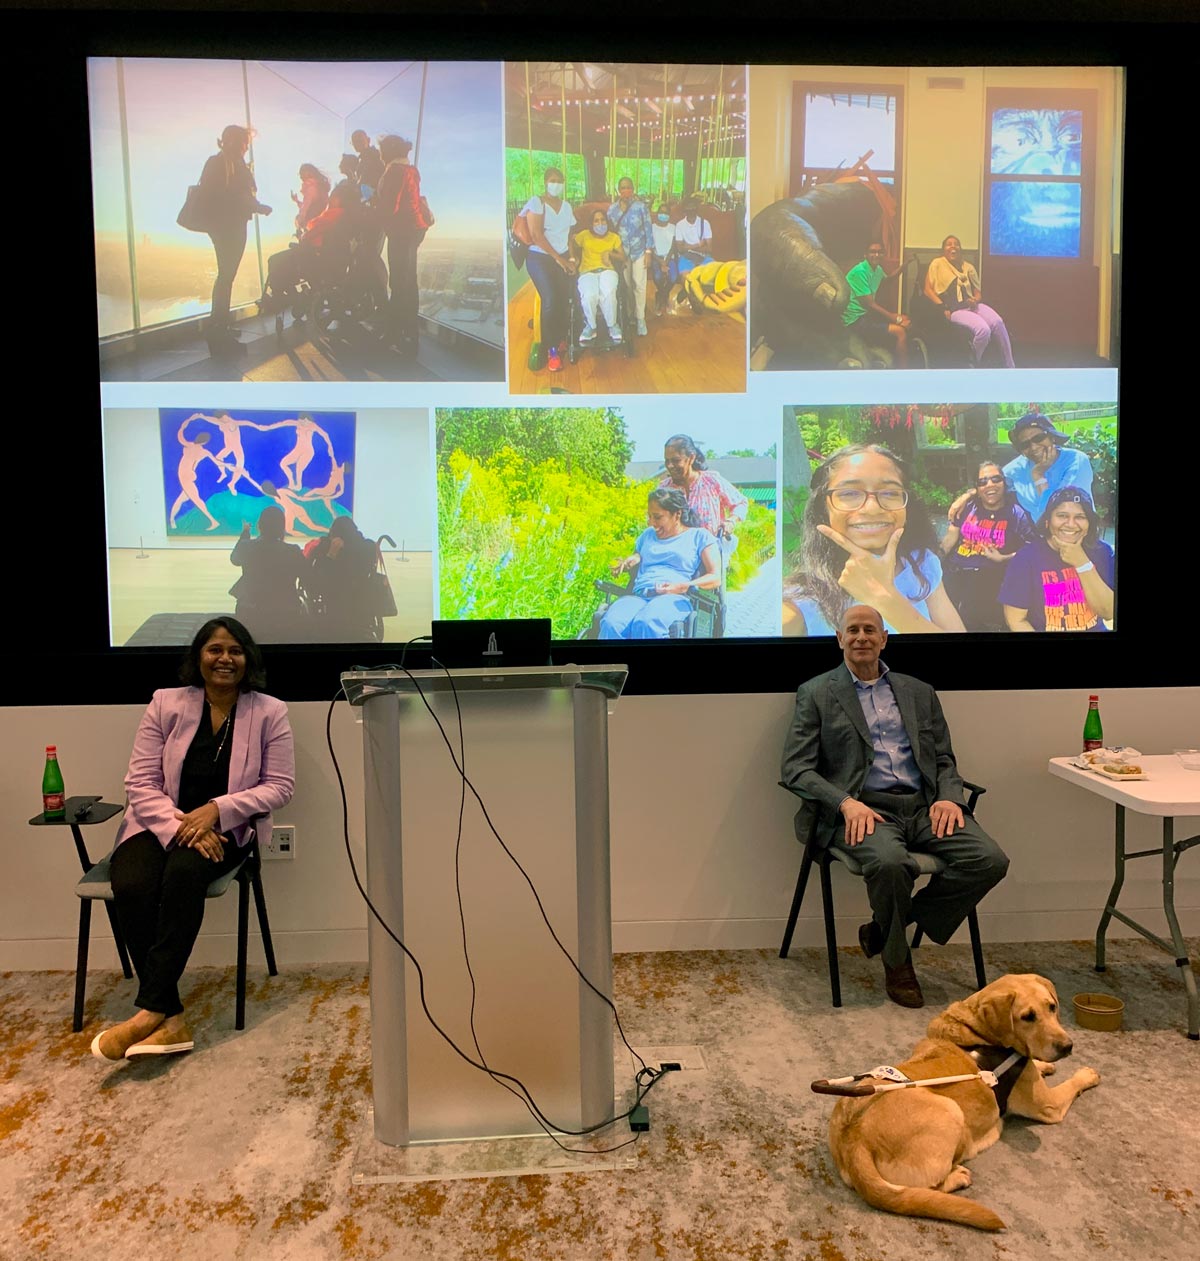 Lakshmee Lachhman-Persad and Peter Slatin along with Peter's guide dog Inga at the Elements of Service training at the Summit Observatory at One Vanderbilt, seated in front of the projection featuring various photographs.